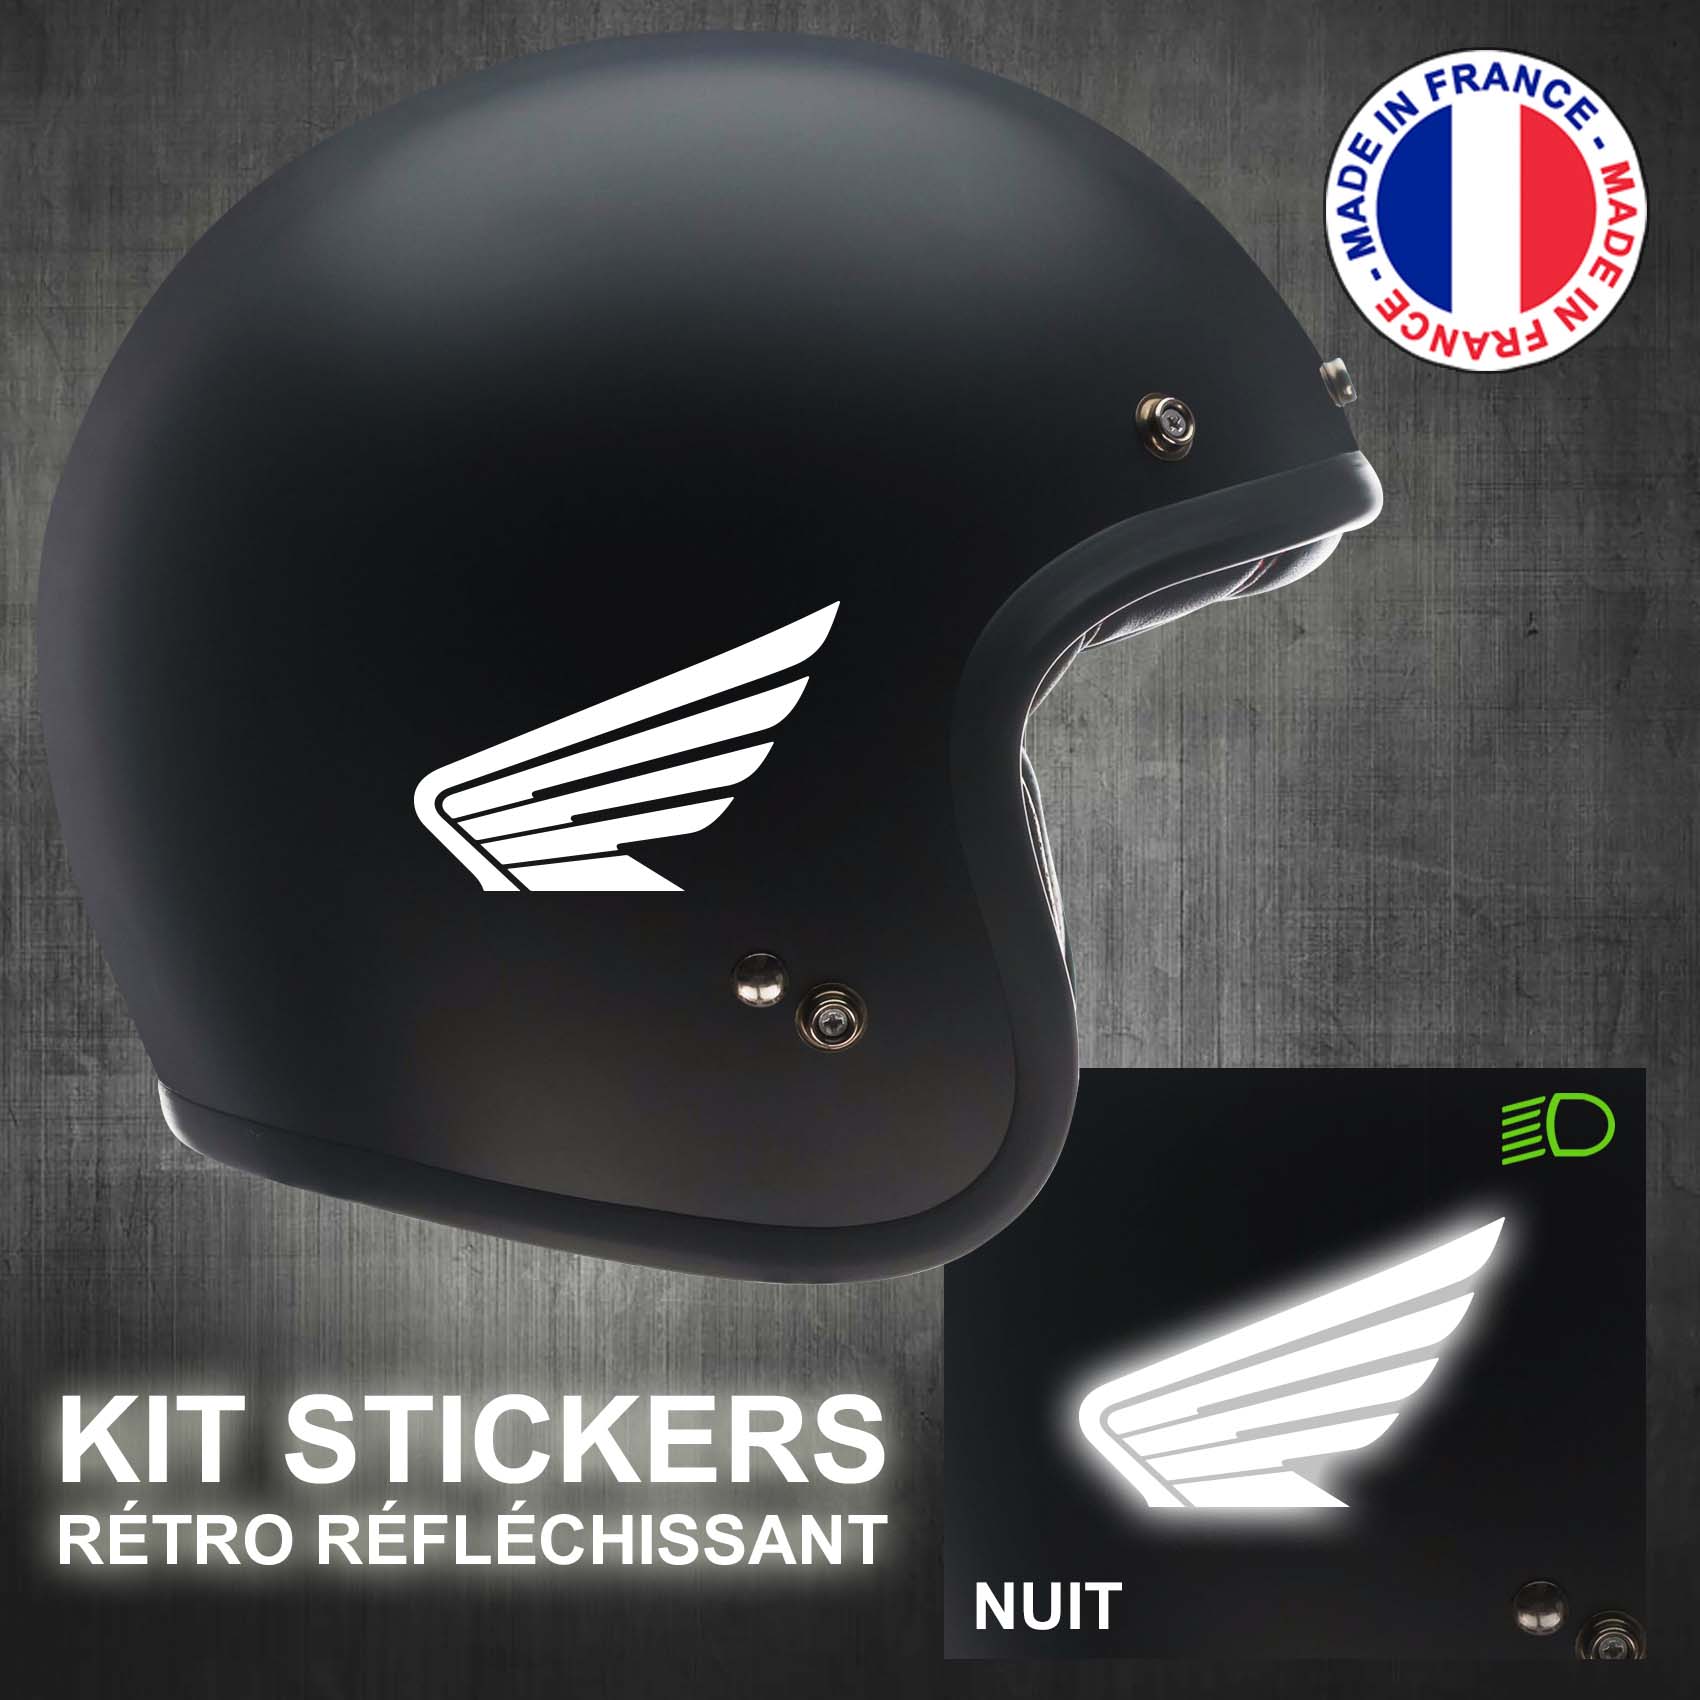 stickers-casque-moto-honda-ref3-retro-reflechissant-autocollant-noir-moto-velo-tuning-racing-route-sticker-casques-adhesif-scooter-nuit-securite-decals-personnalise-personnalisable-min